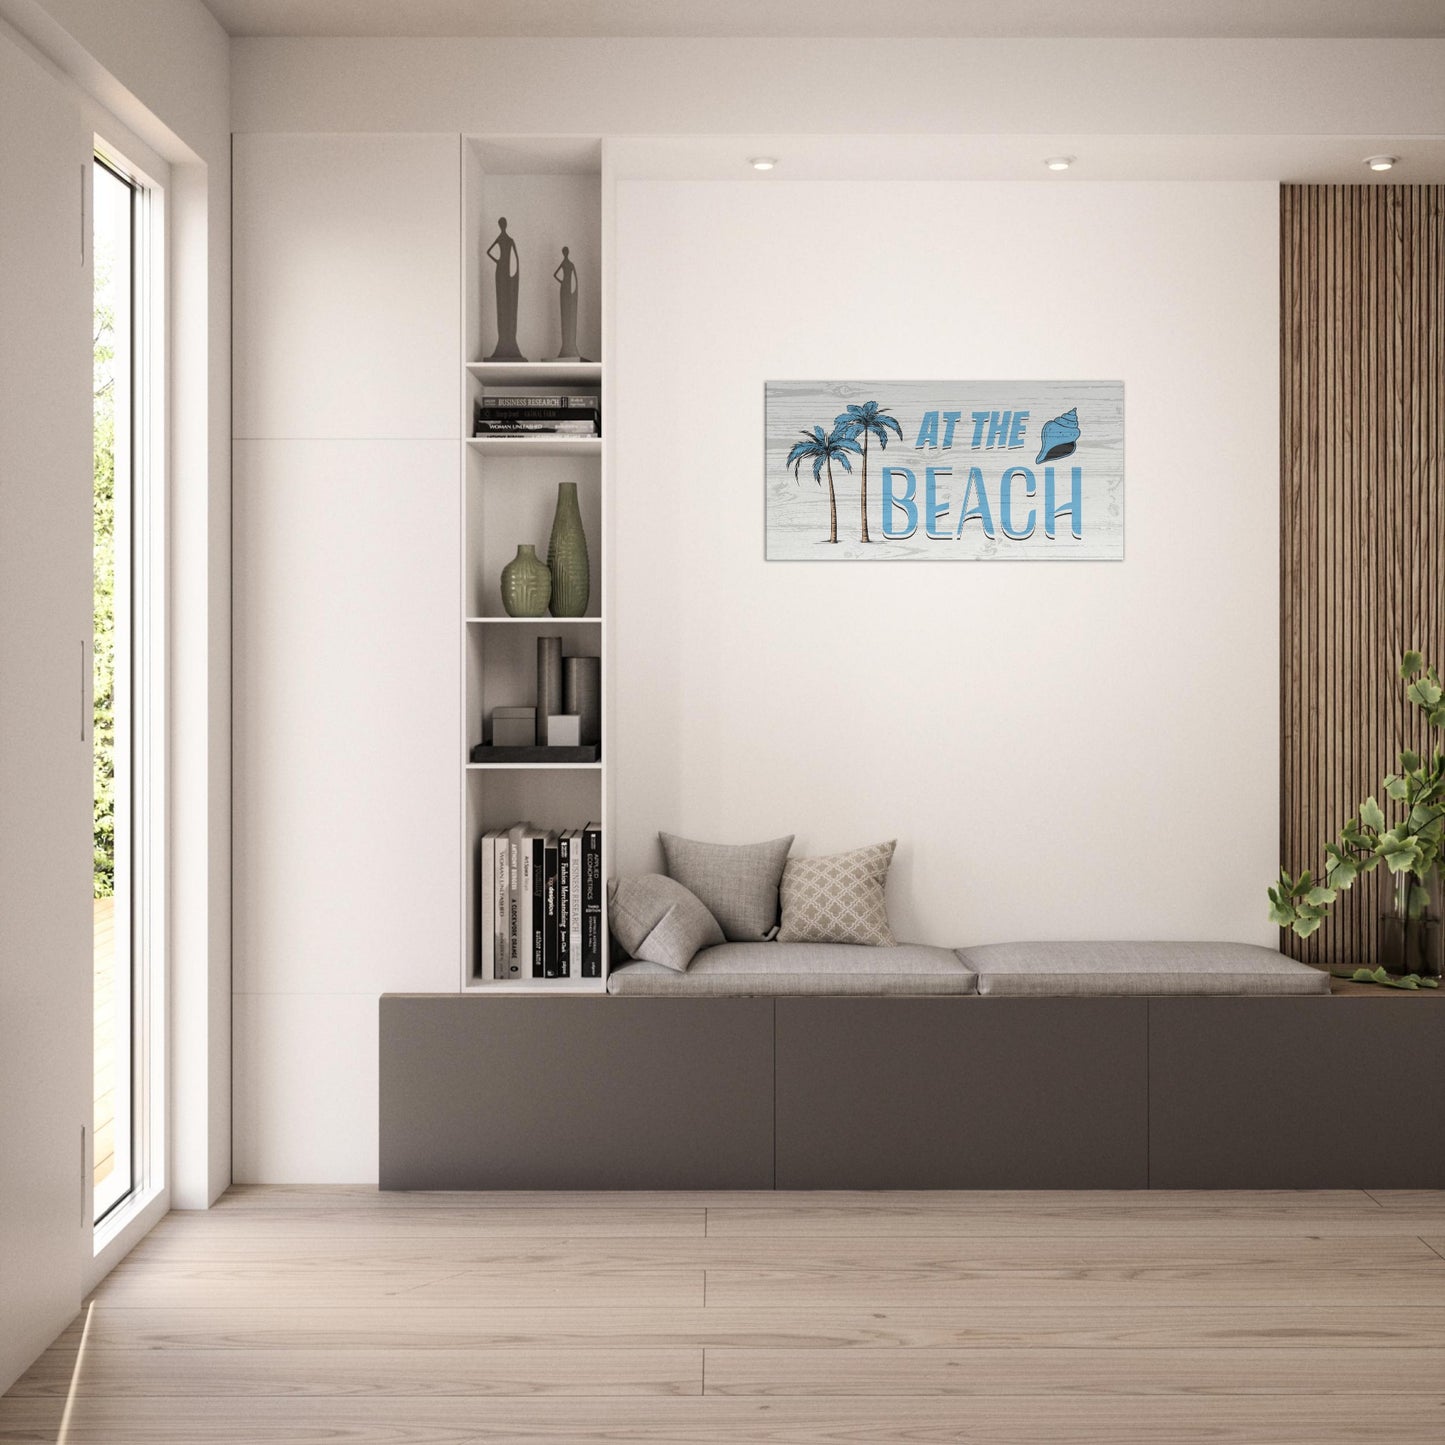 At the Beach Large Blue Canvas Wall Print on Caribbean Rays